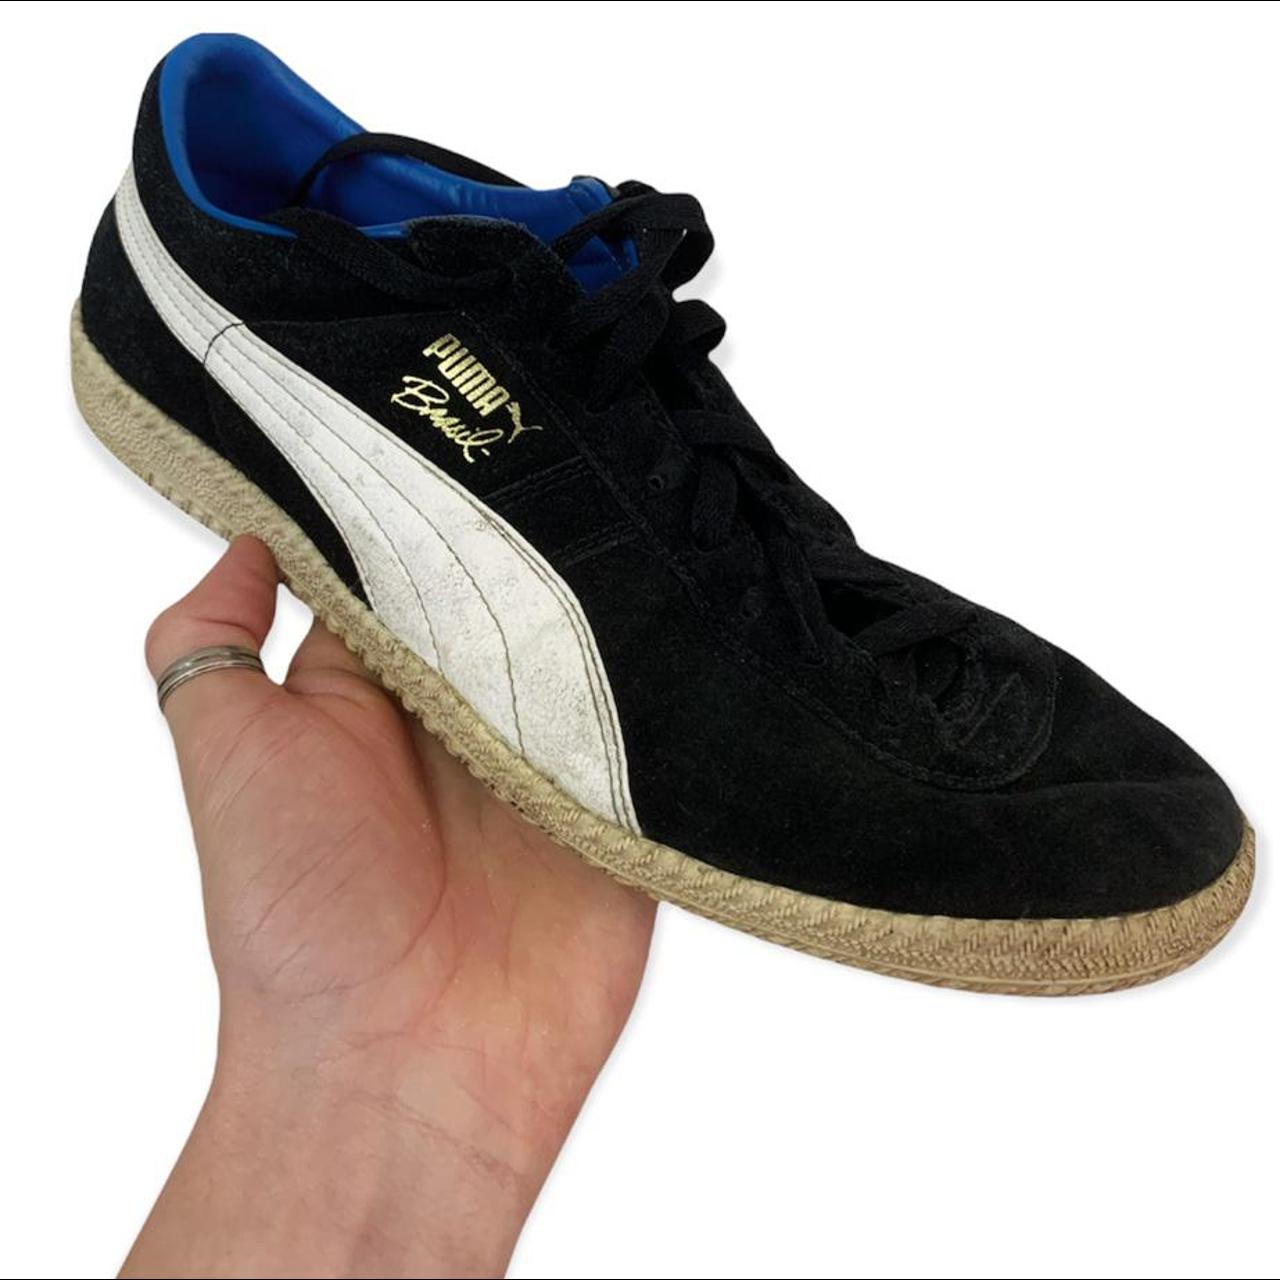 Puma Brasil trainers Suede black Could do with a - Depop